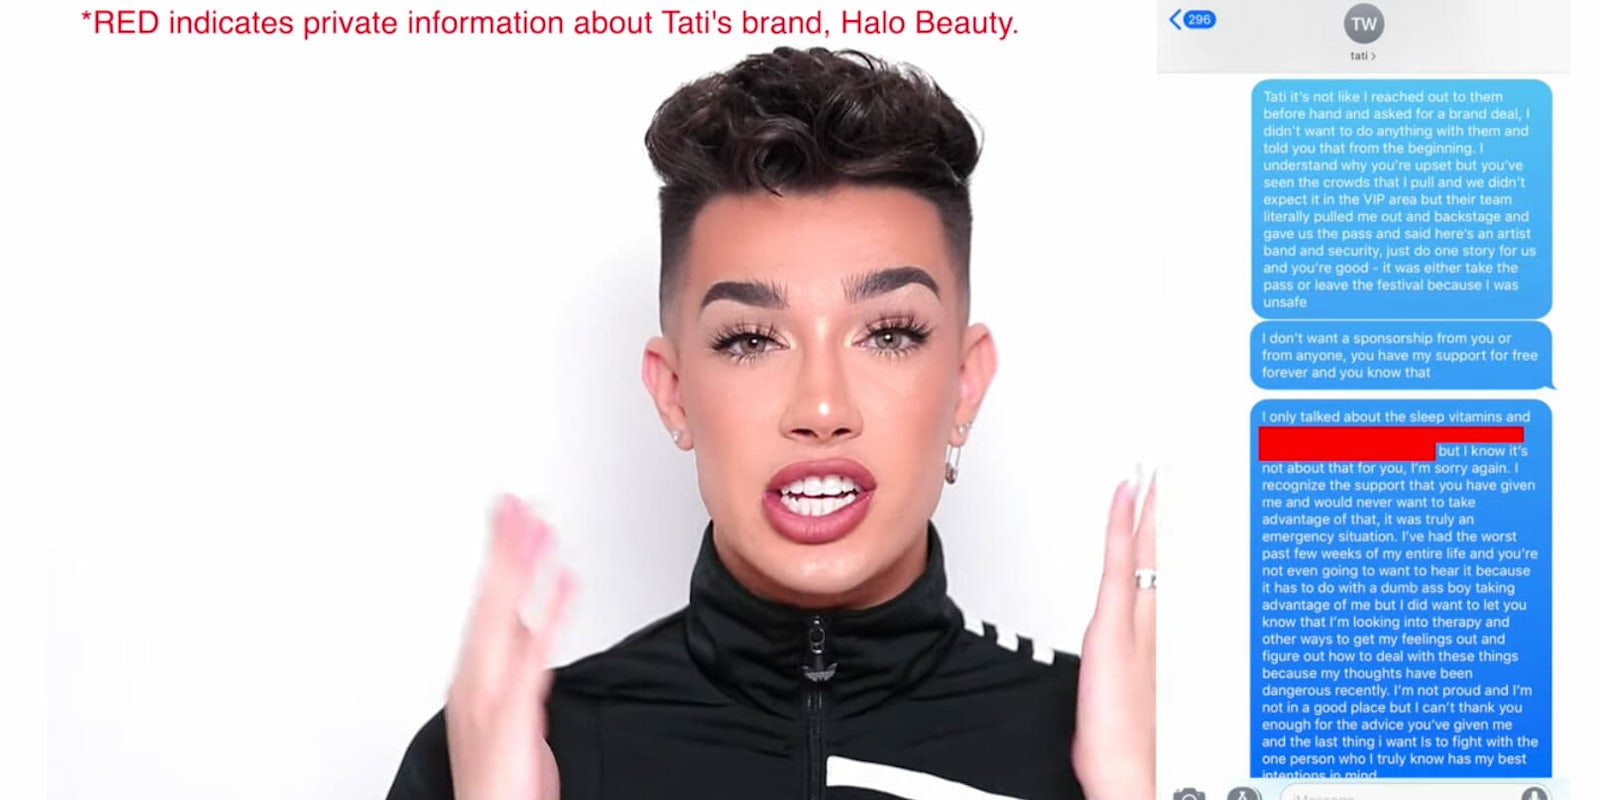 A video titled 'No more lies' shows James Charles explaining his side of the story with screenshots of text messages with Tati Westbrook